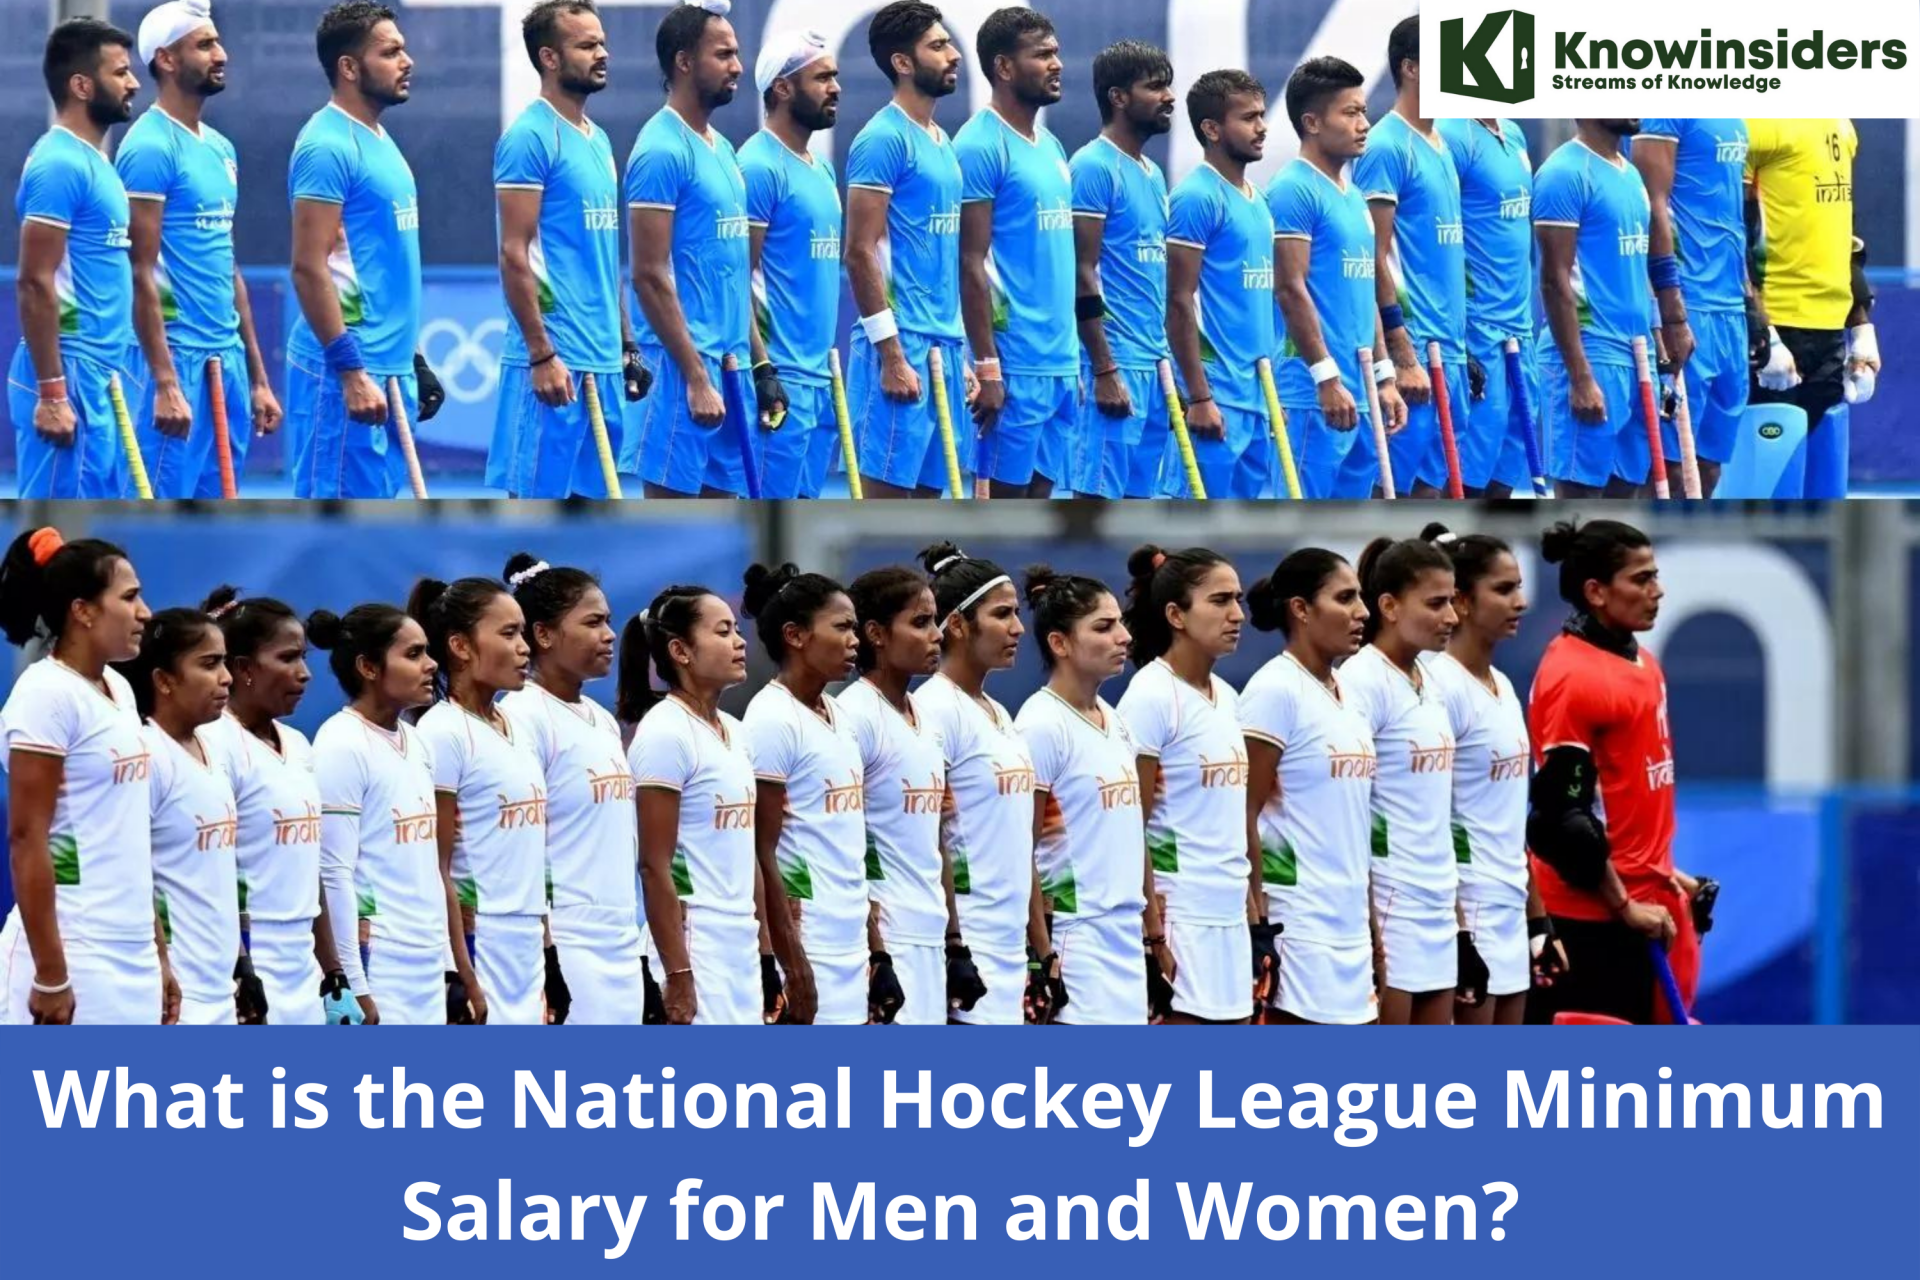 What is NHL Minimum Salary for Men and Women?